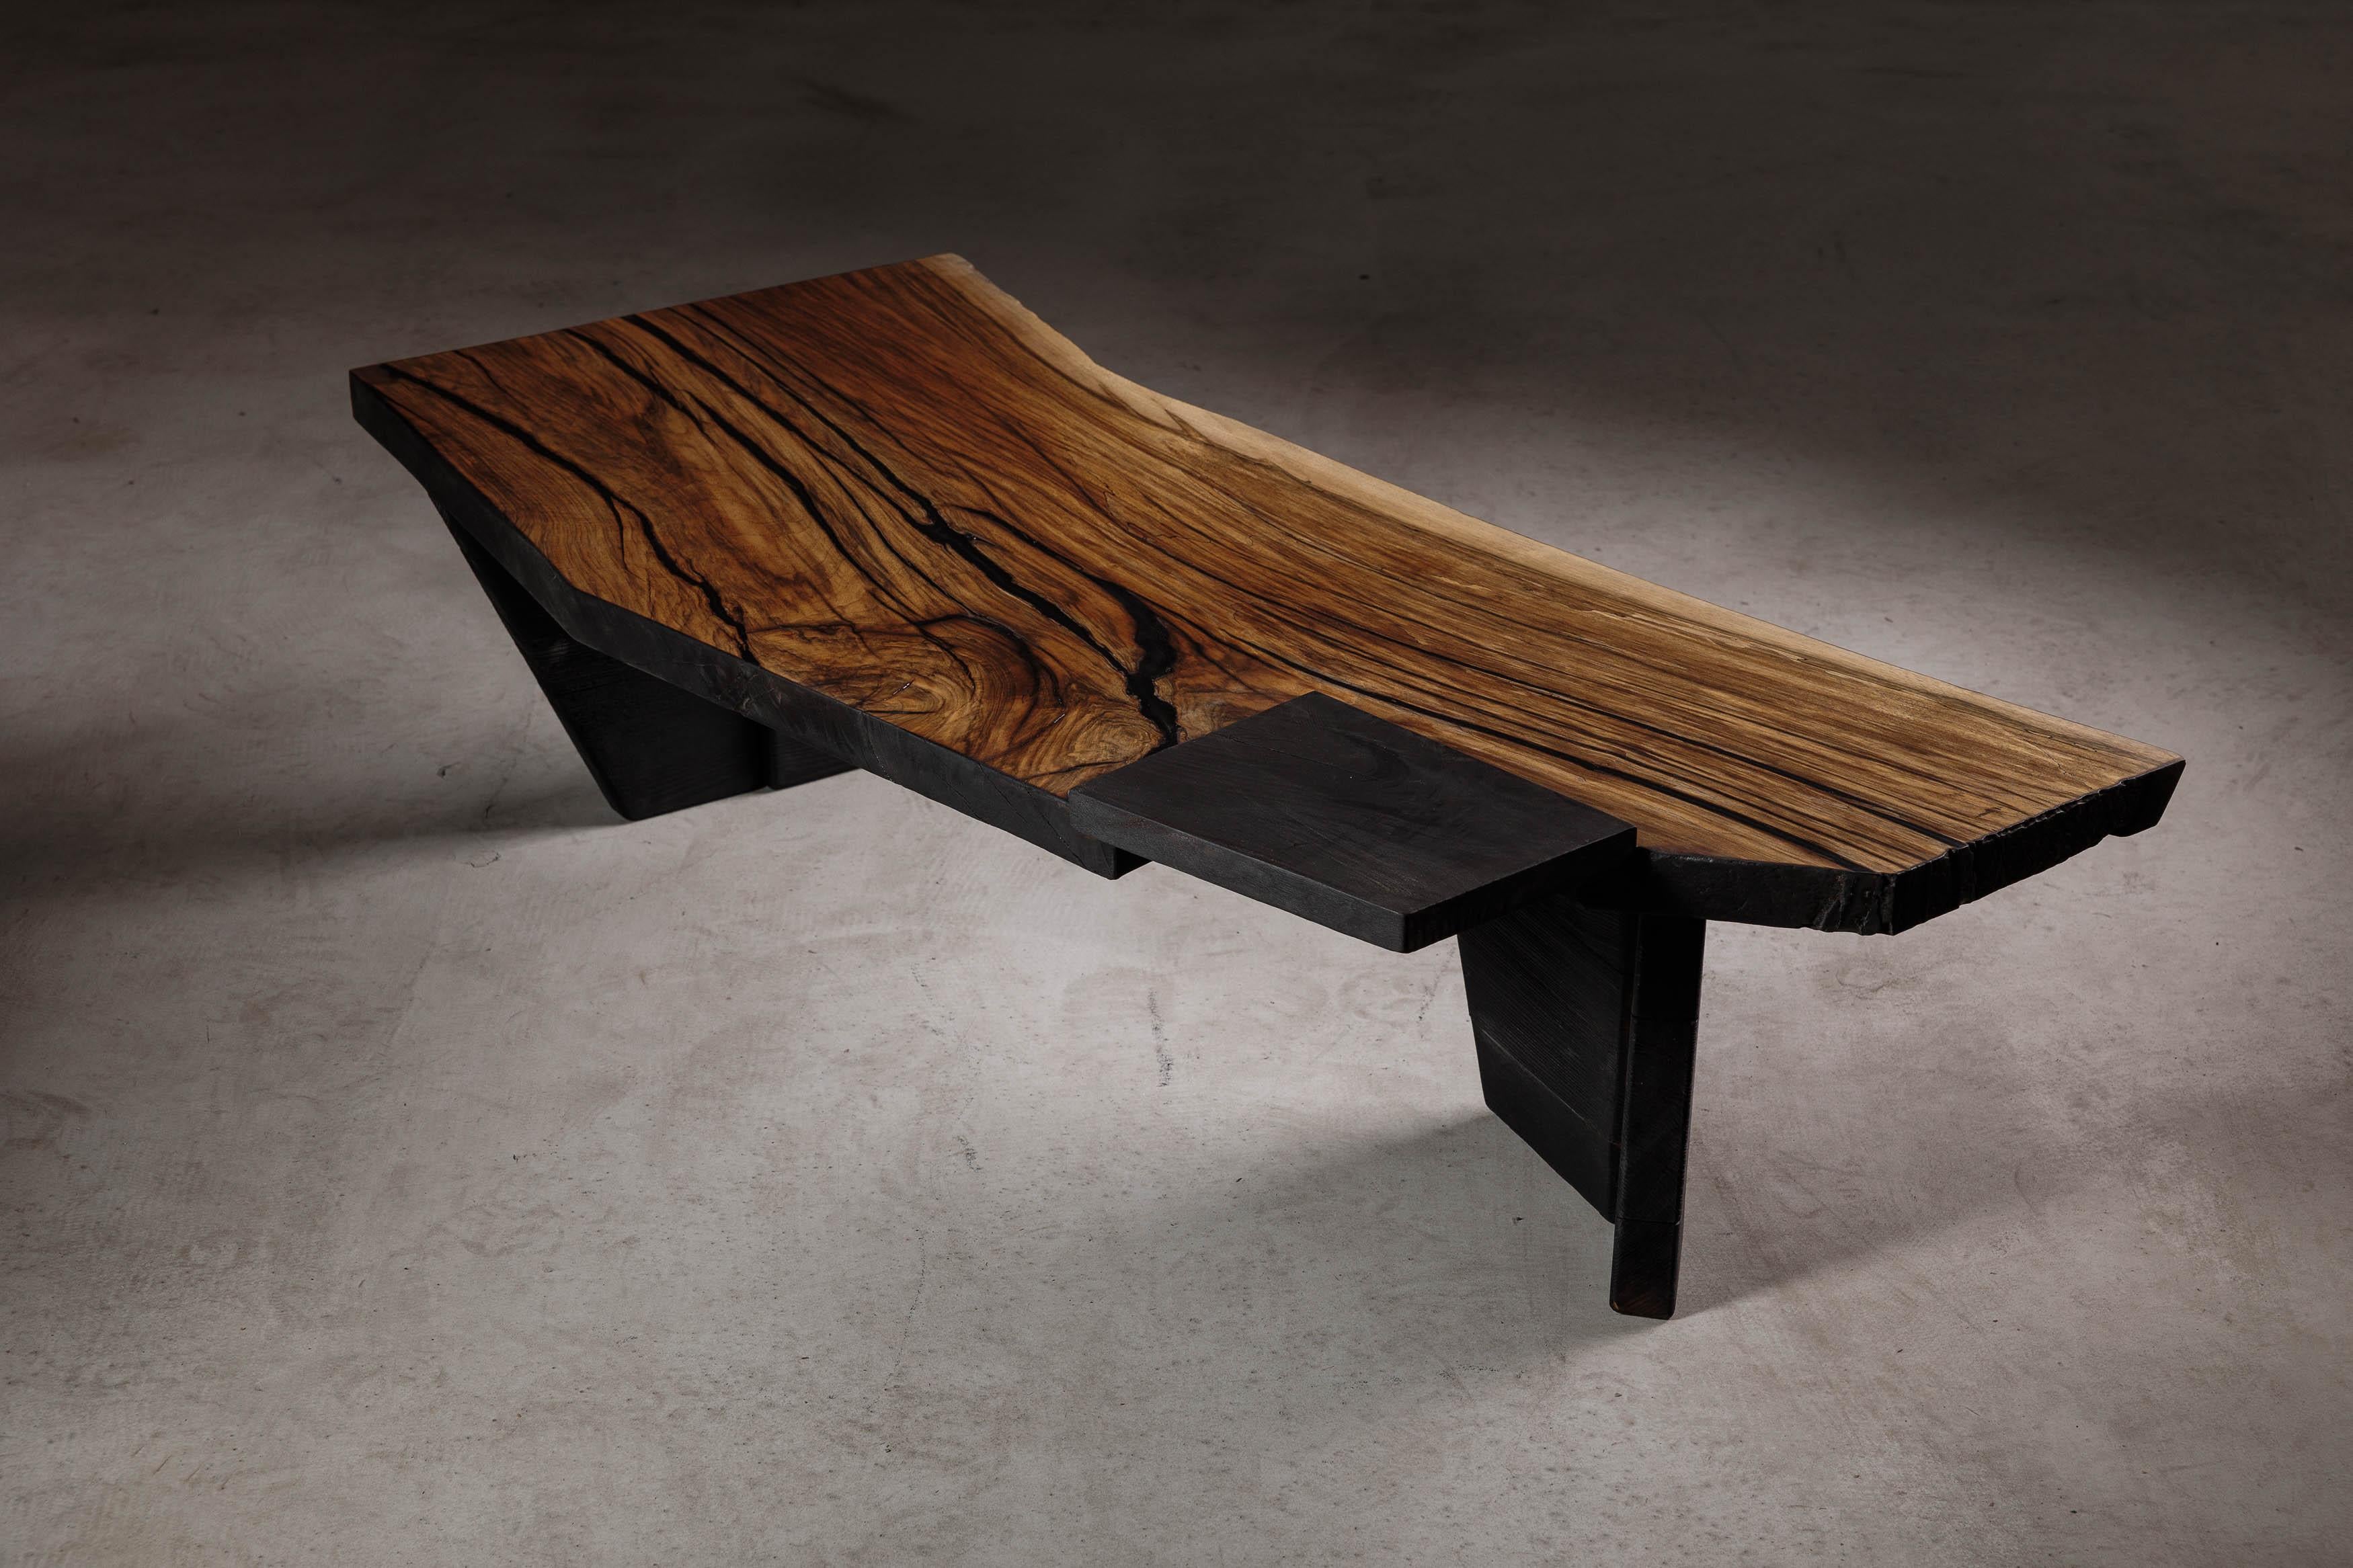 EM108 coffee table by Eero Moss
One of a kind
Dimensions; W 136 x D 58 x H 35 cm
Materials: Walnut, charred ash, India ink.
Finish: Natural oils.

18 Brut Collection

The latest collection by the artist is a tribute to the brutalist